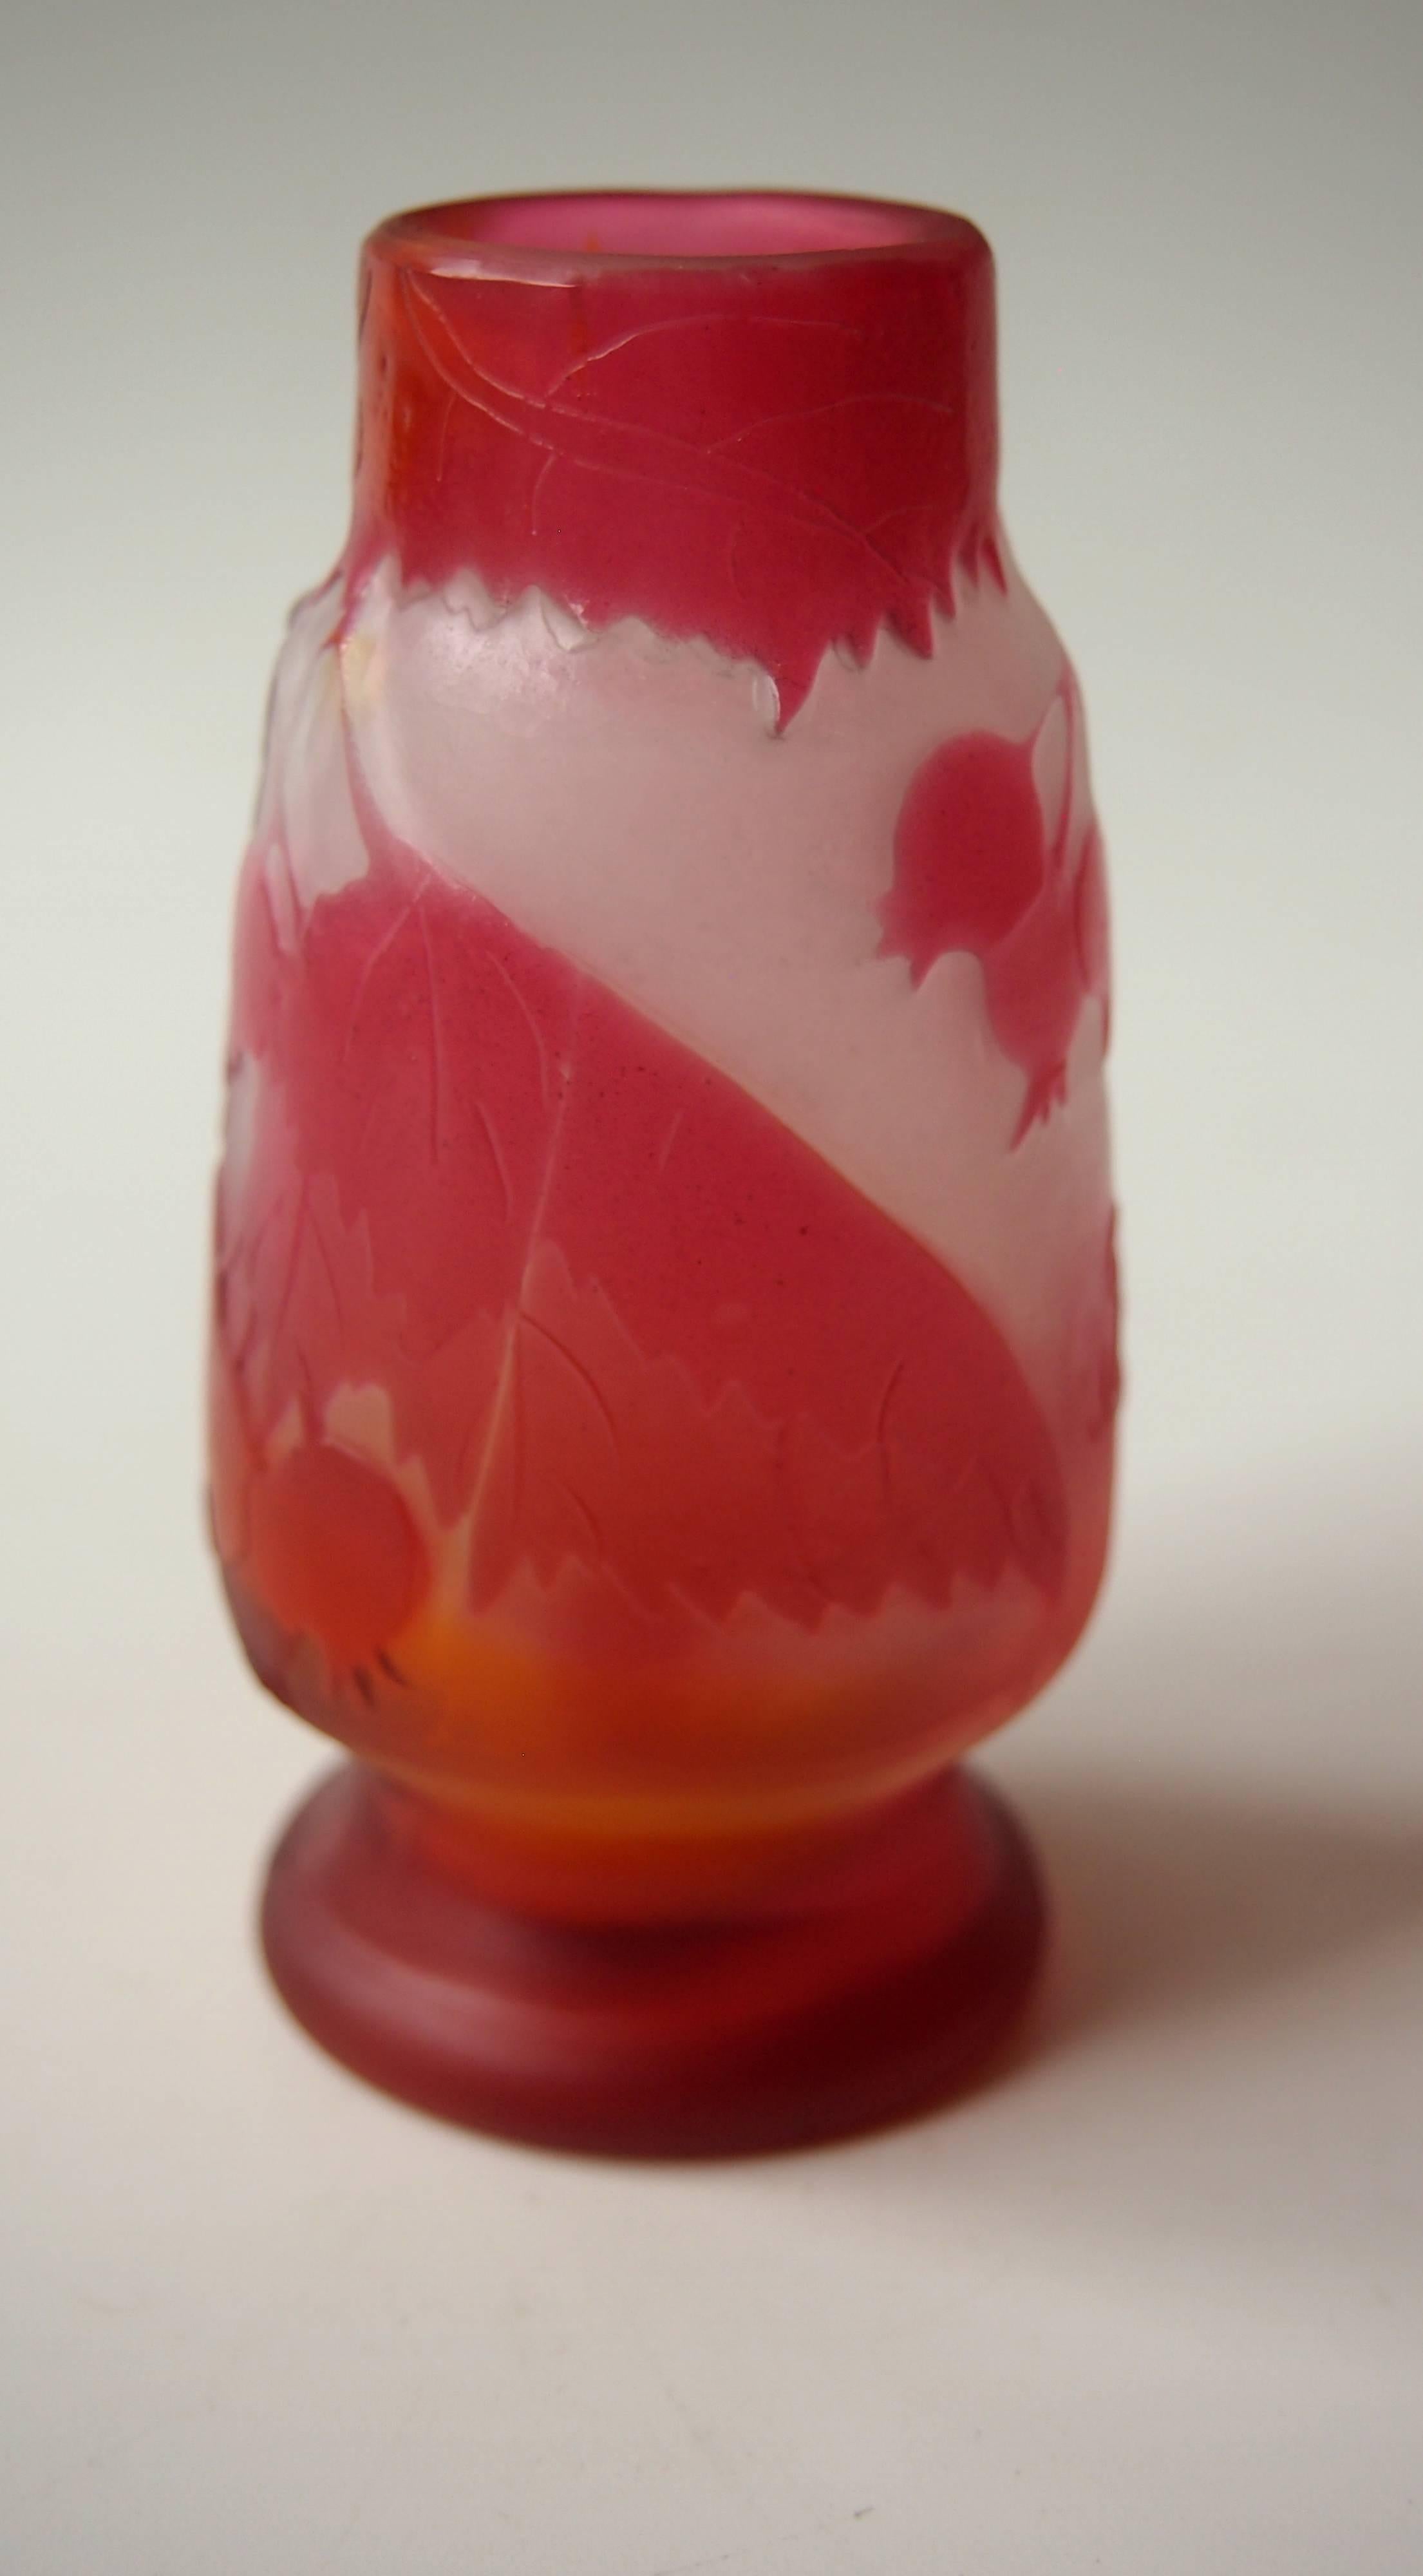 Very pretty classic French Art Nouveau, near miniature, Emile Galle cameo vase in red and orange depicting branches with foliage and berries -a Classic image and shape. Signed in cameo (image3)

Emile Galle was probably the greatest glass maker of